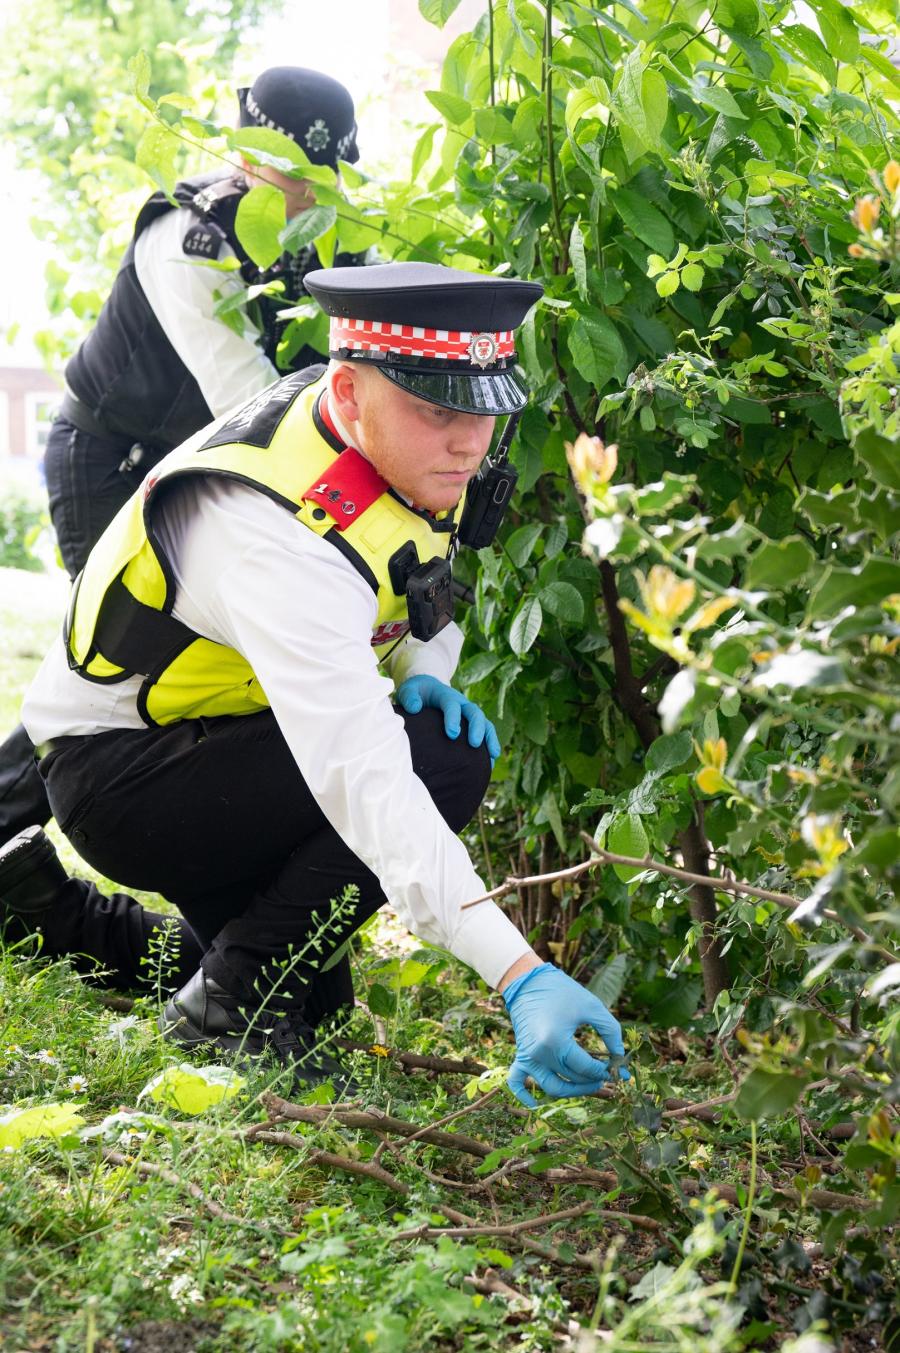 LET officers carrying out a weapons sweep by searching under bushes in a local park.